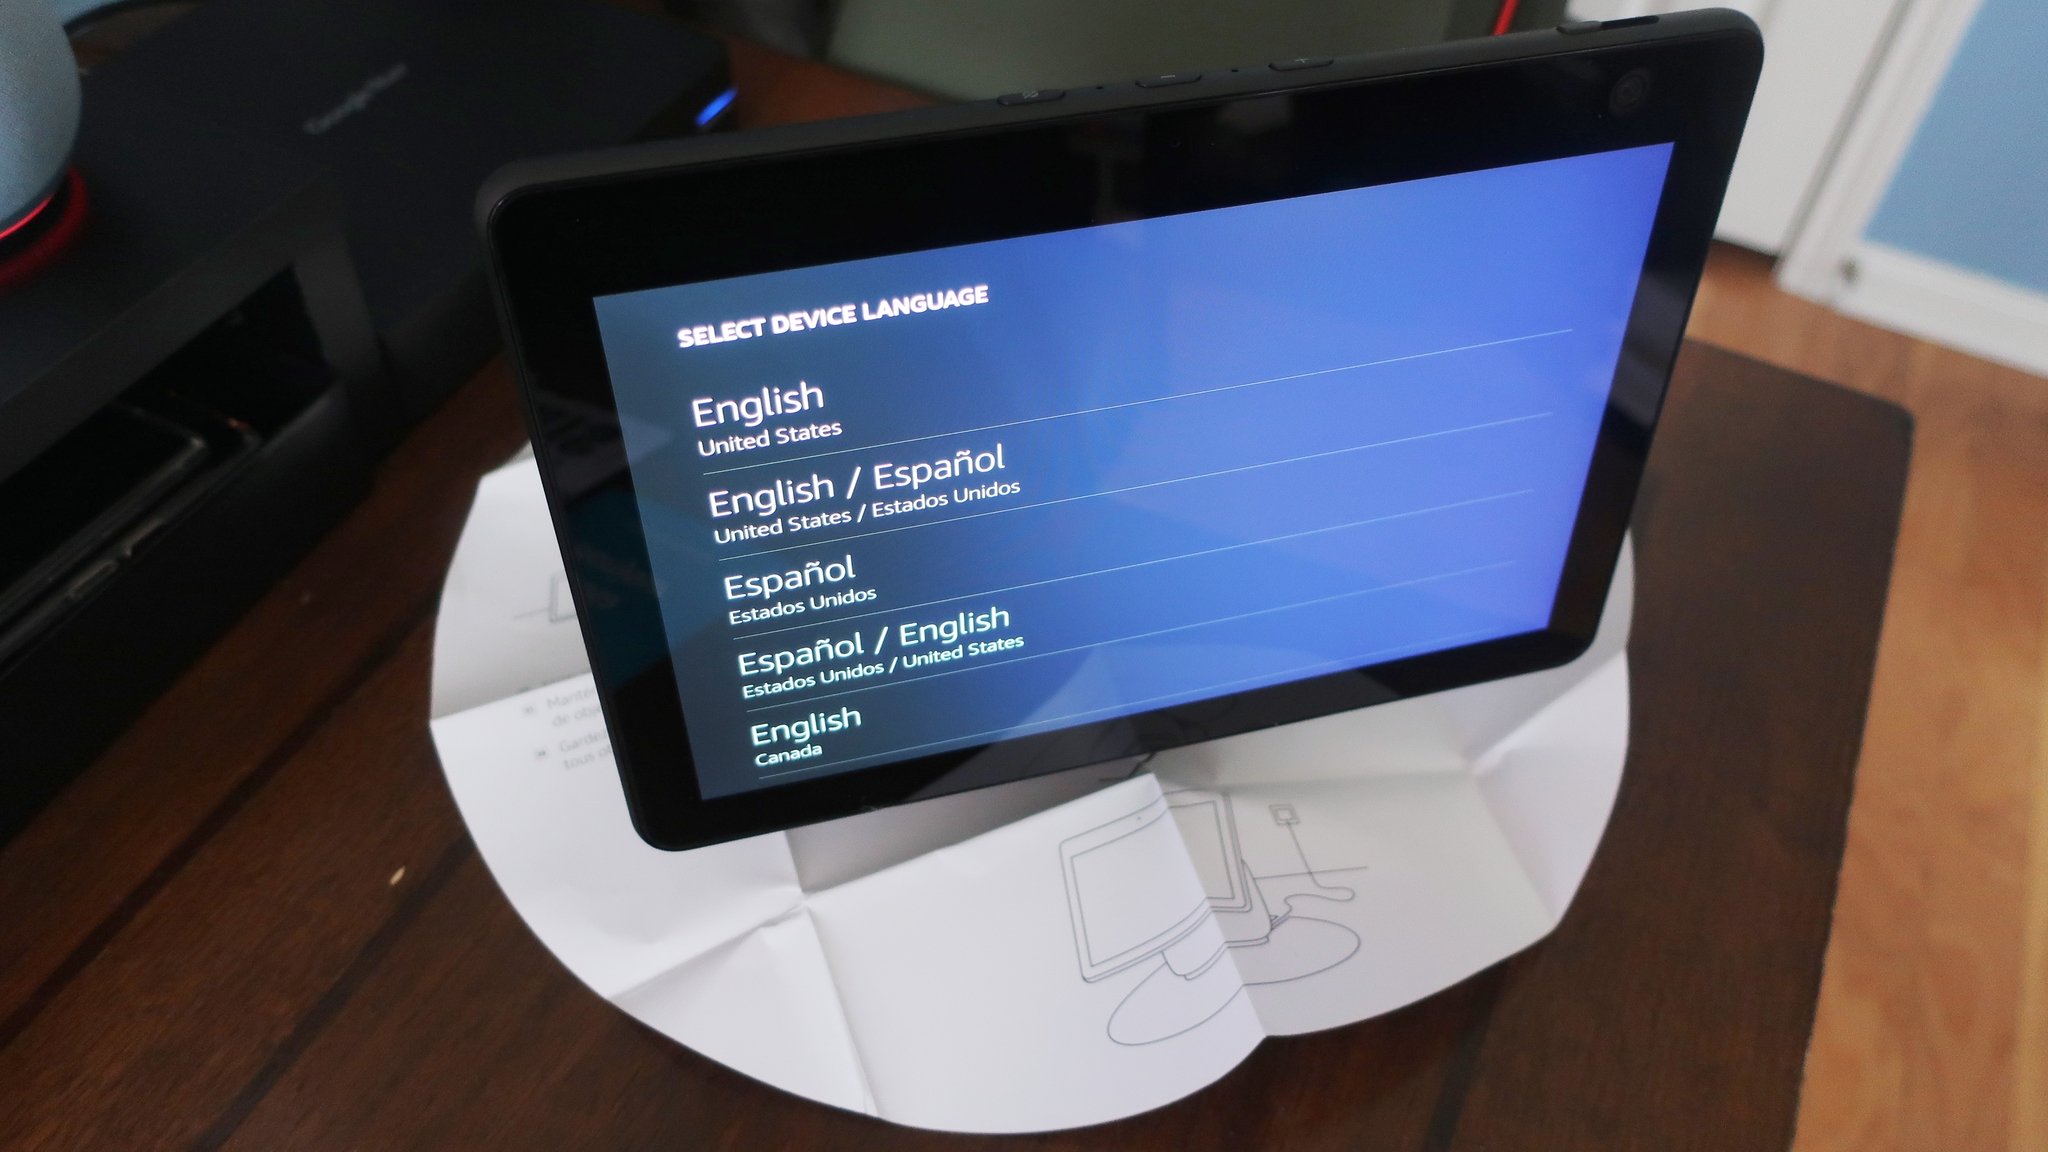 Amazon Echo Show 10: Select device language screen and room mapping guide paper